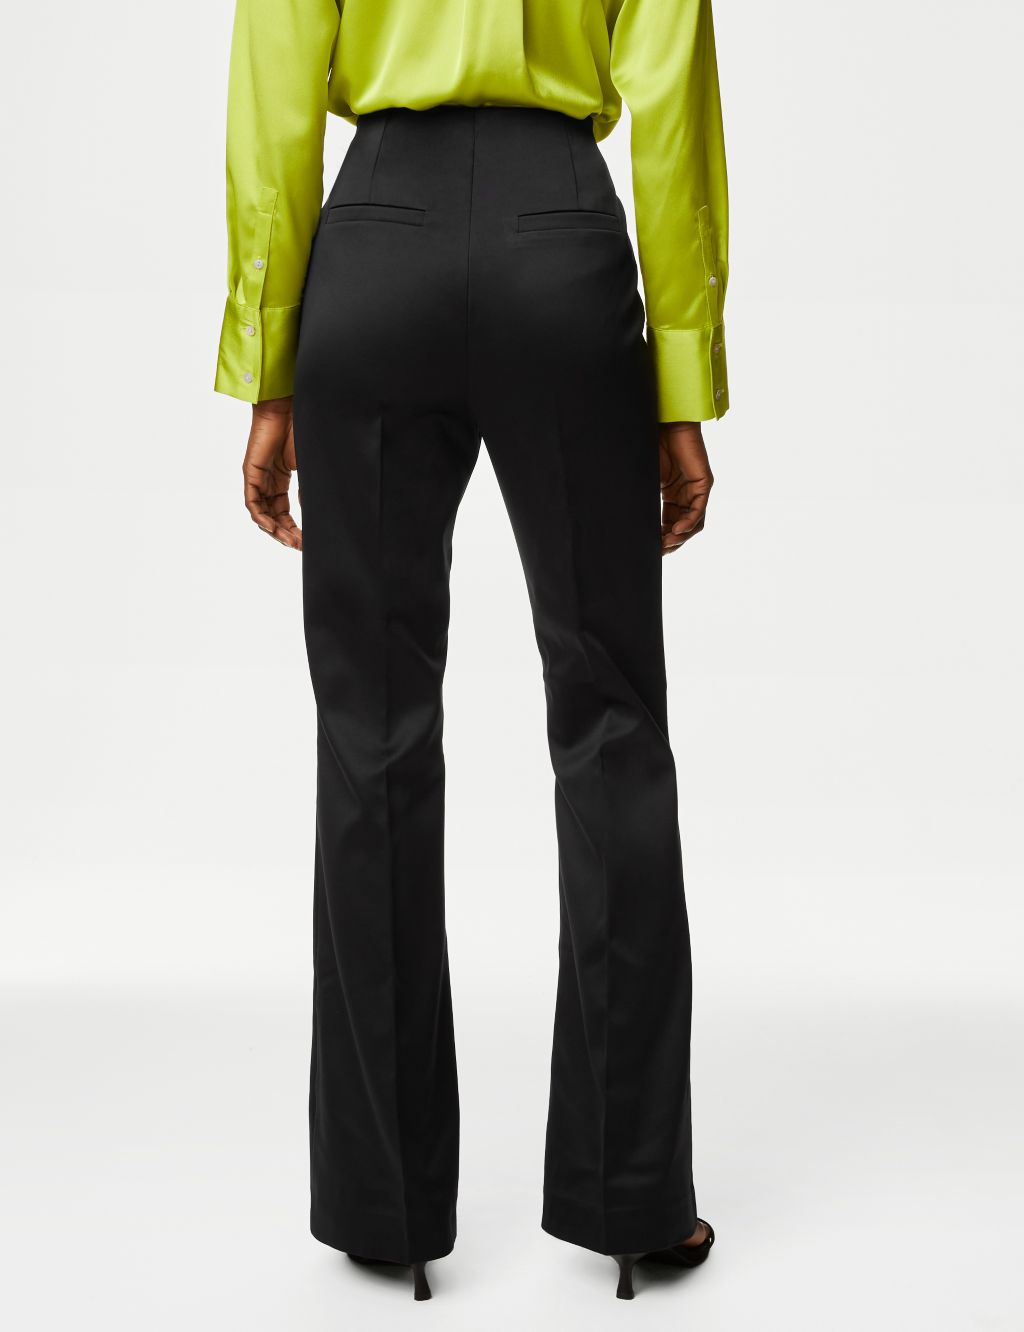 Satin Slim Fit Flare Trousers image 6